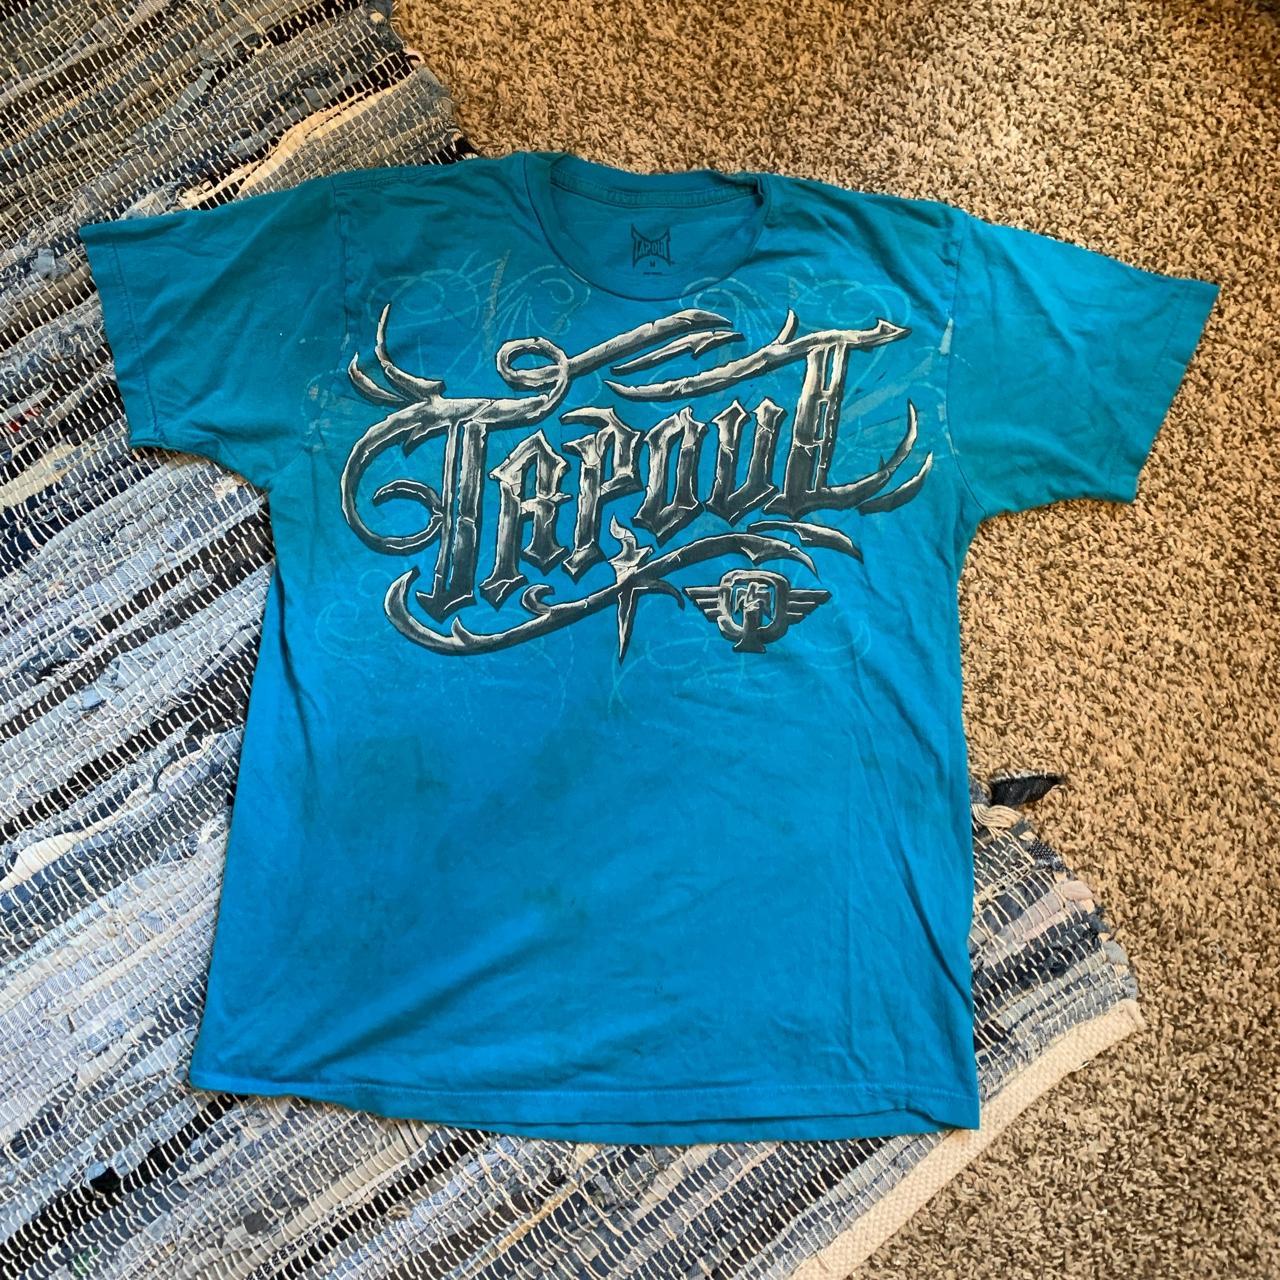 Y2K Tapout shirt - 8/10 condition (staining on front... - Depop